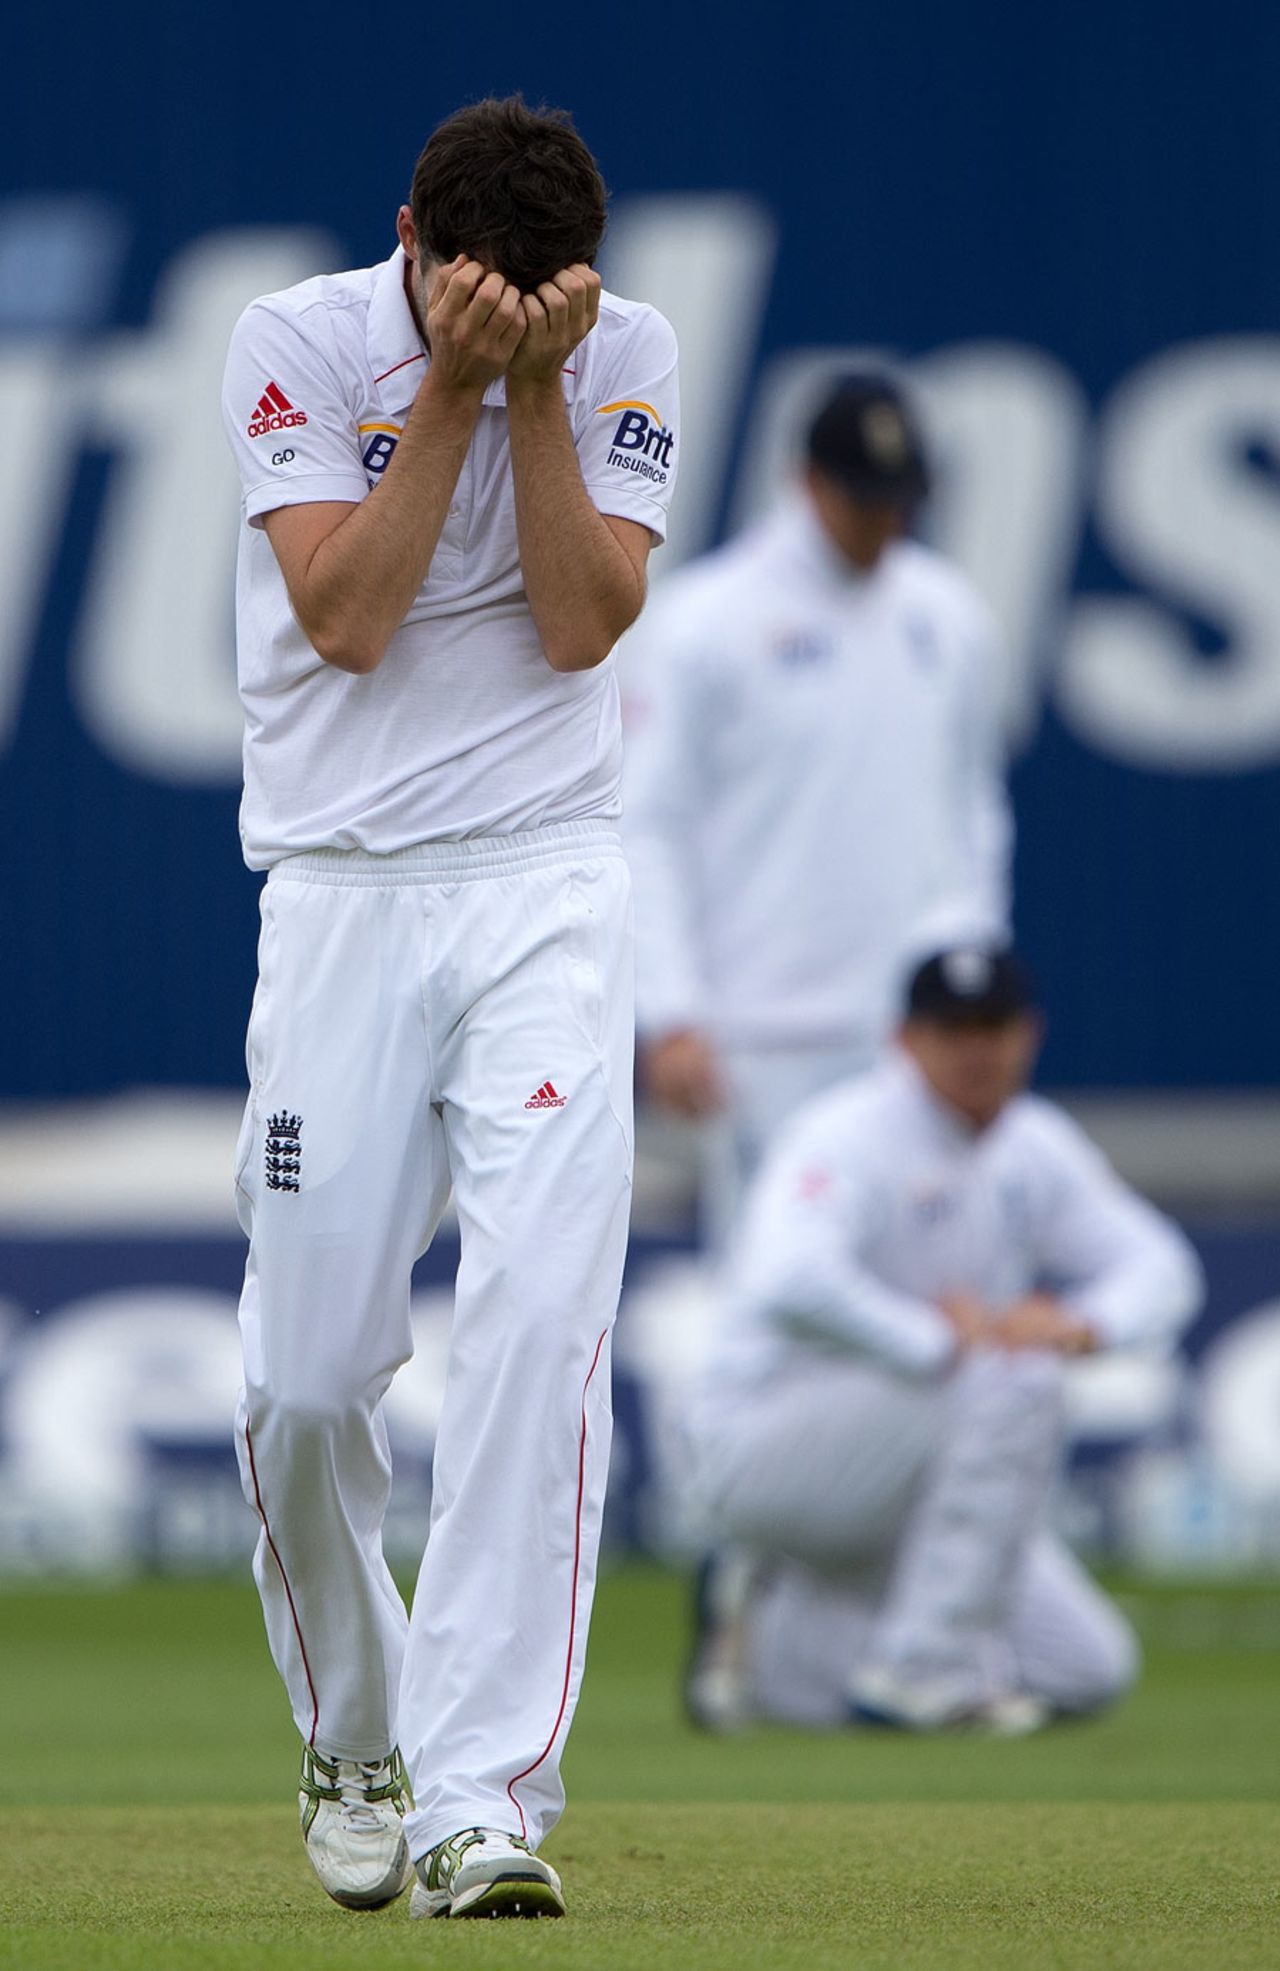 Graham Onions is disappointed as Ian Bell drops Adrian Barath, England v West Indies, 3rd Test, Edgbaston, 3rd day, June, 9, 2012